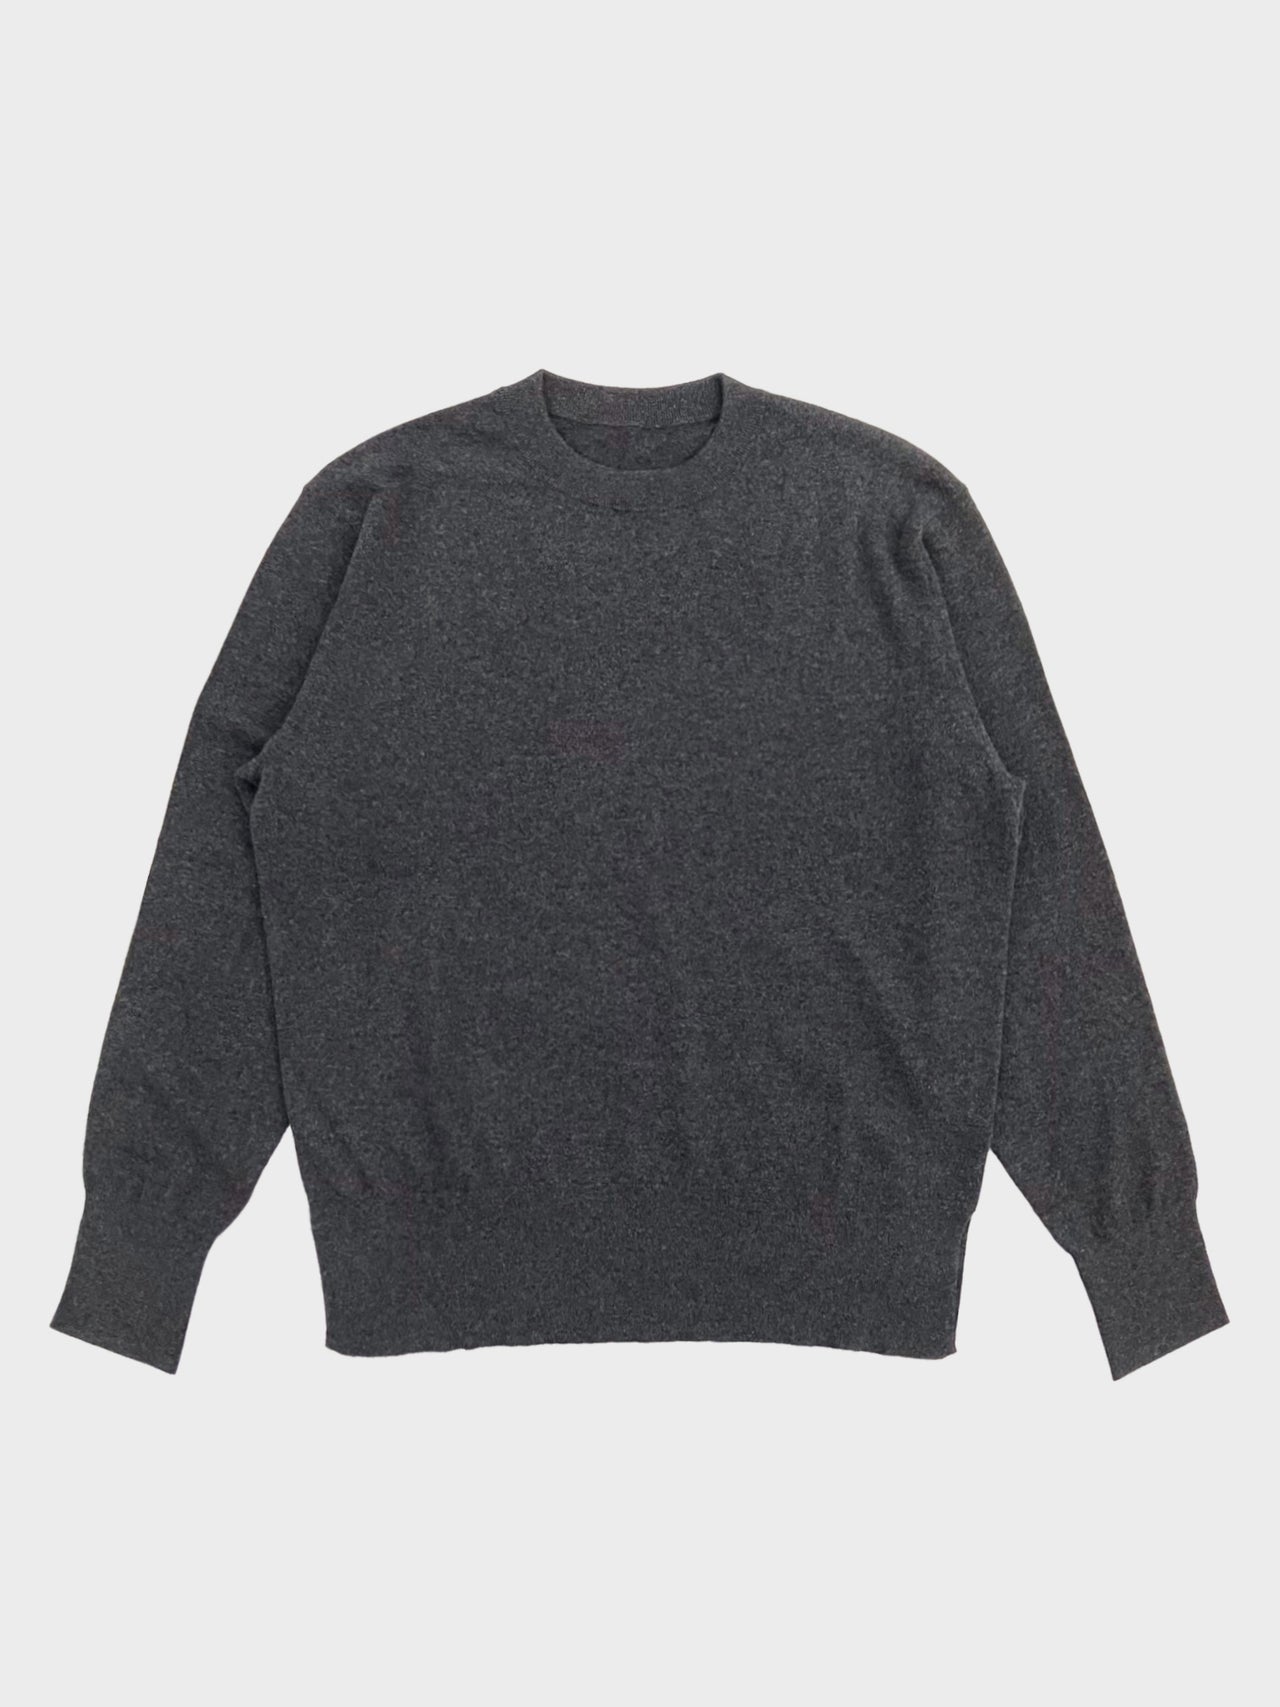 PICEA / 14GG CREW NECK KNIT (CHARCOAL)